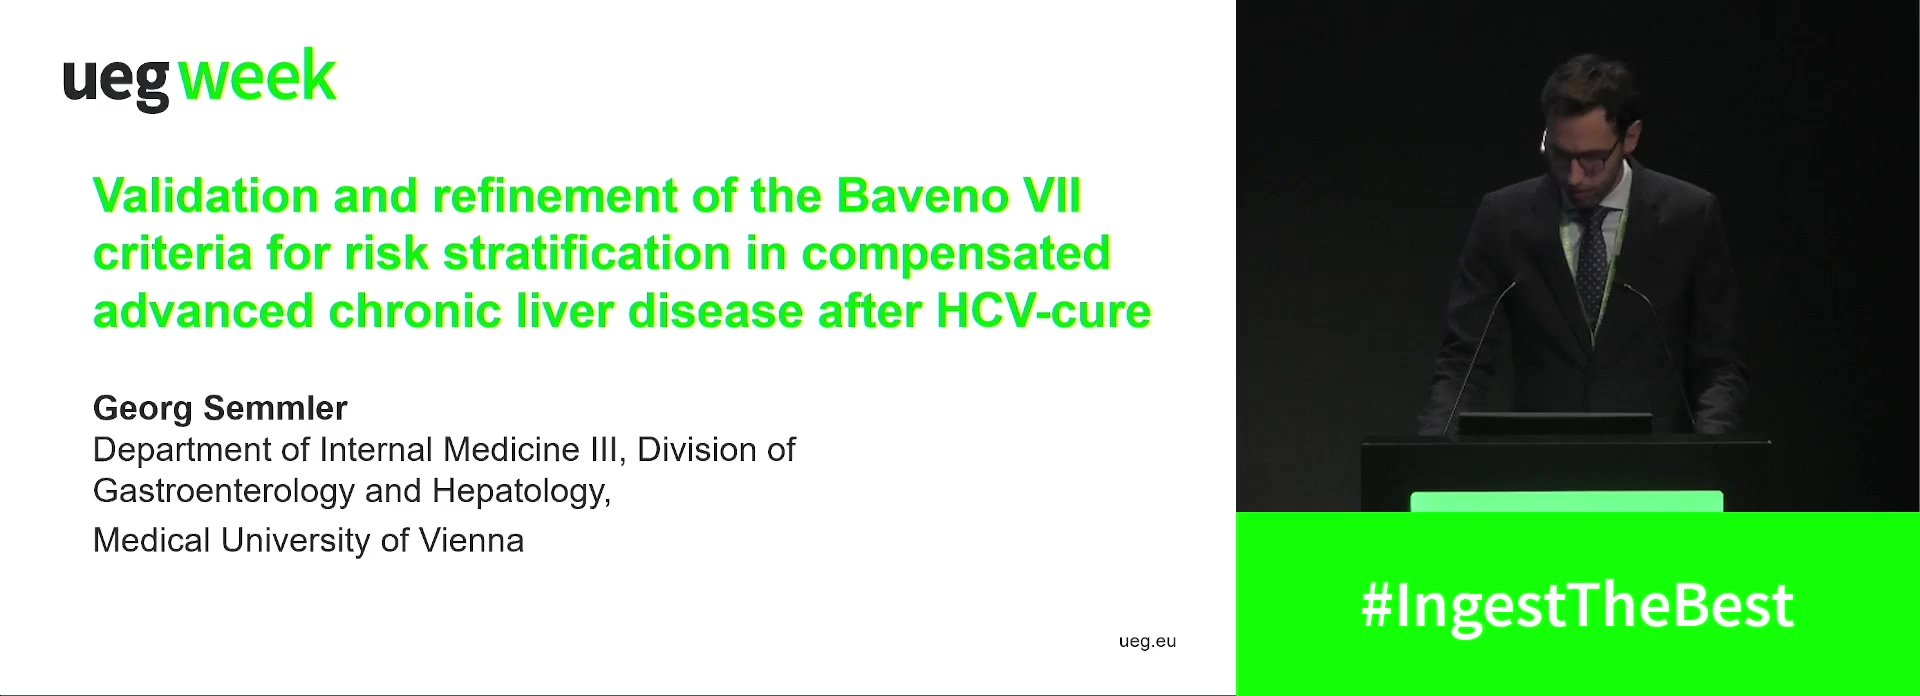 VALIDATION AND REFINEMENT OF THE BAVENO VII CRITERIA FOR RISK STRATIFICATION IN COMPENSATED ADVANCED CHRONIC LIVER DISEASE AFTER HCV-CURE